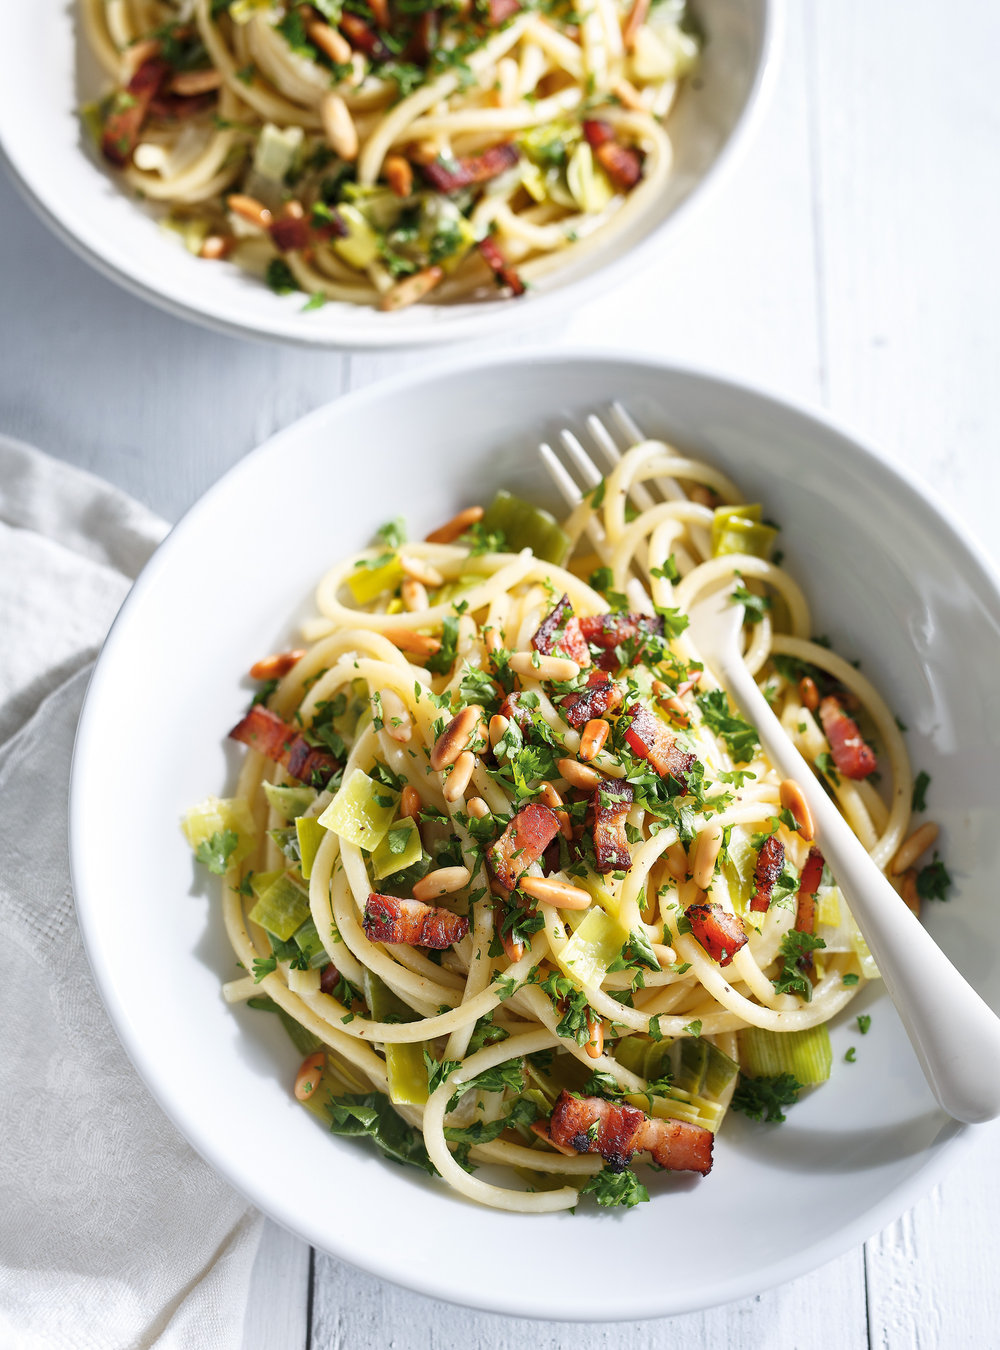 Bucatini with Leek, Bacon and Pine Nuts